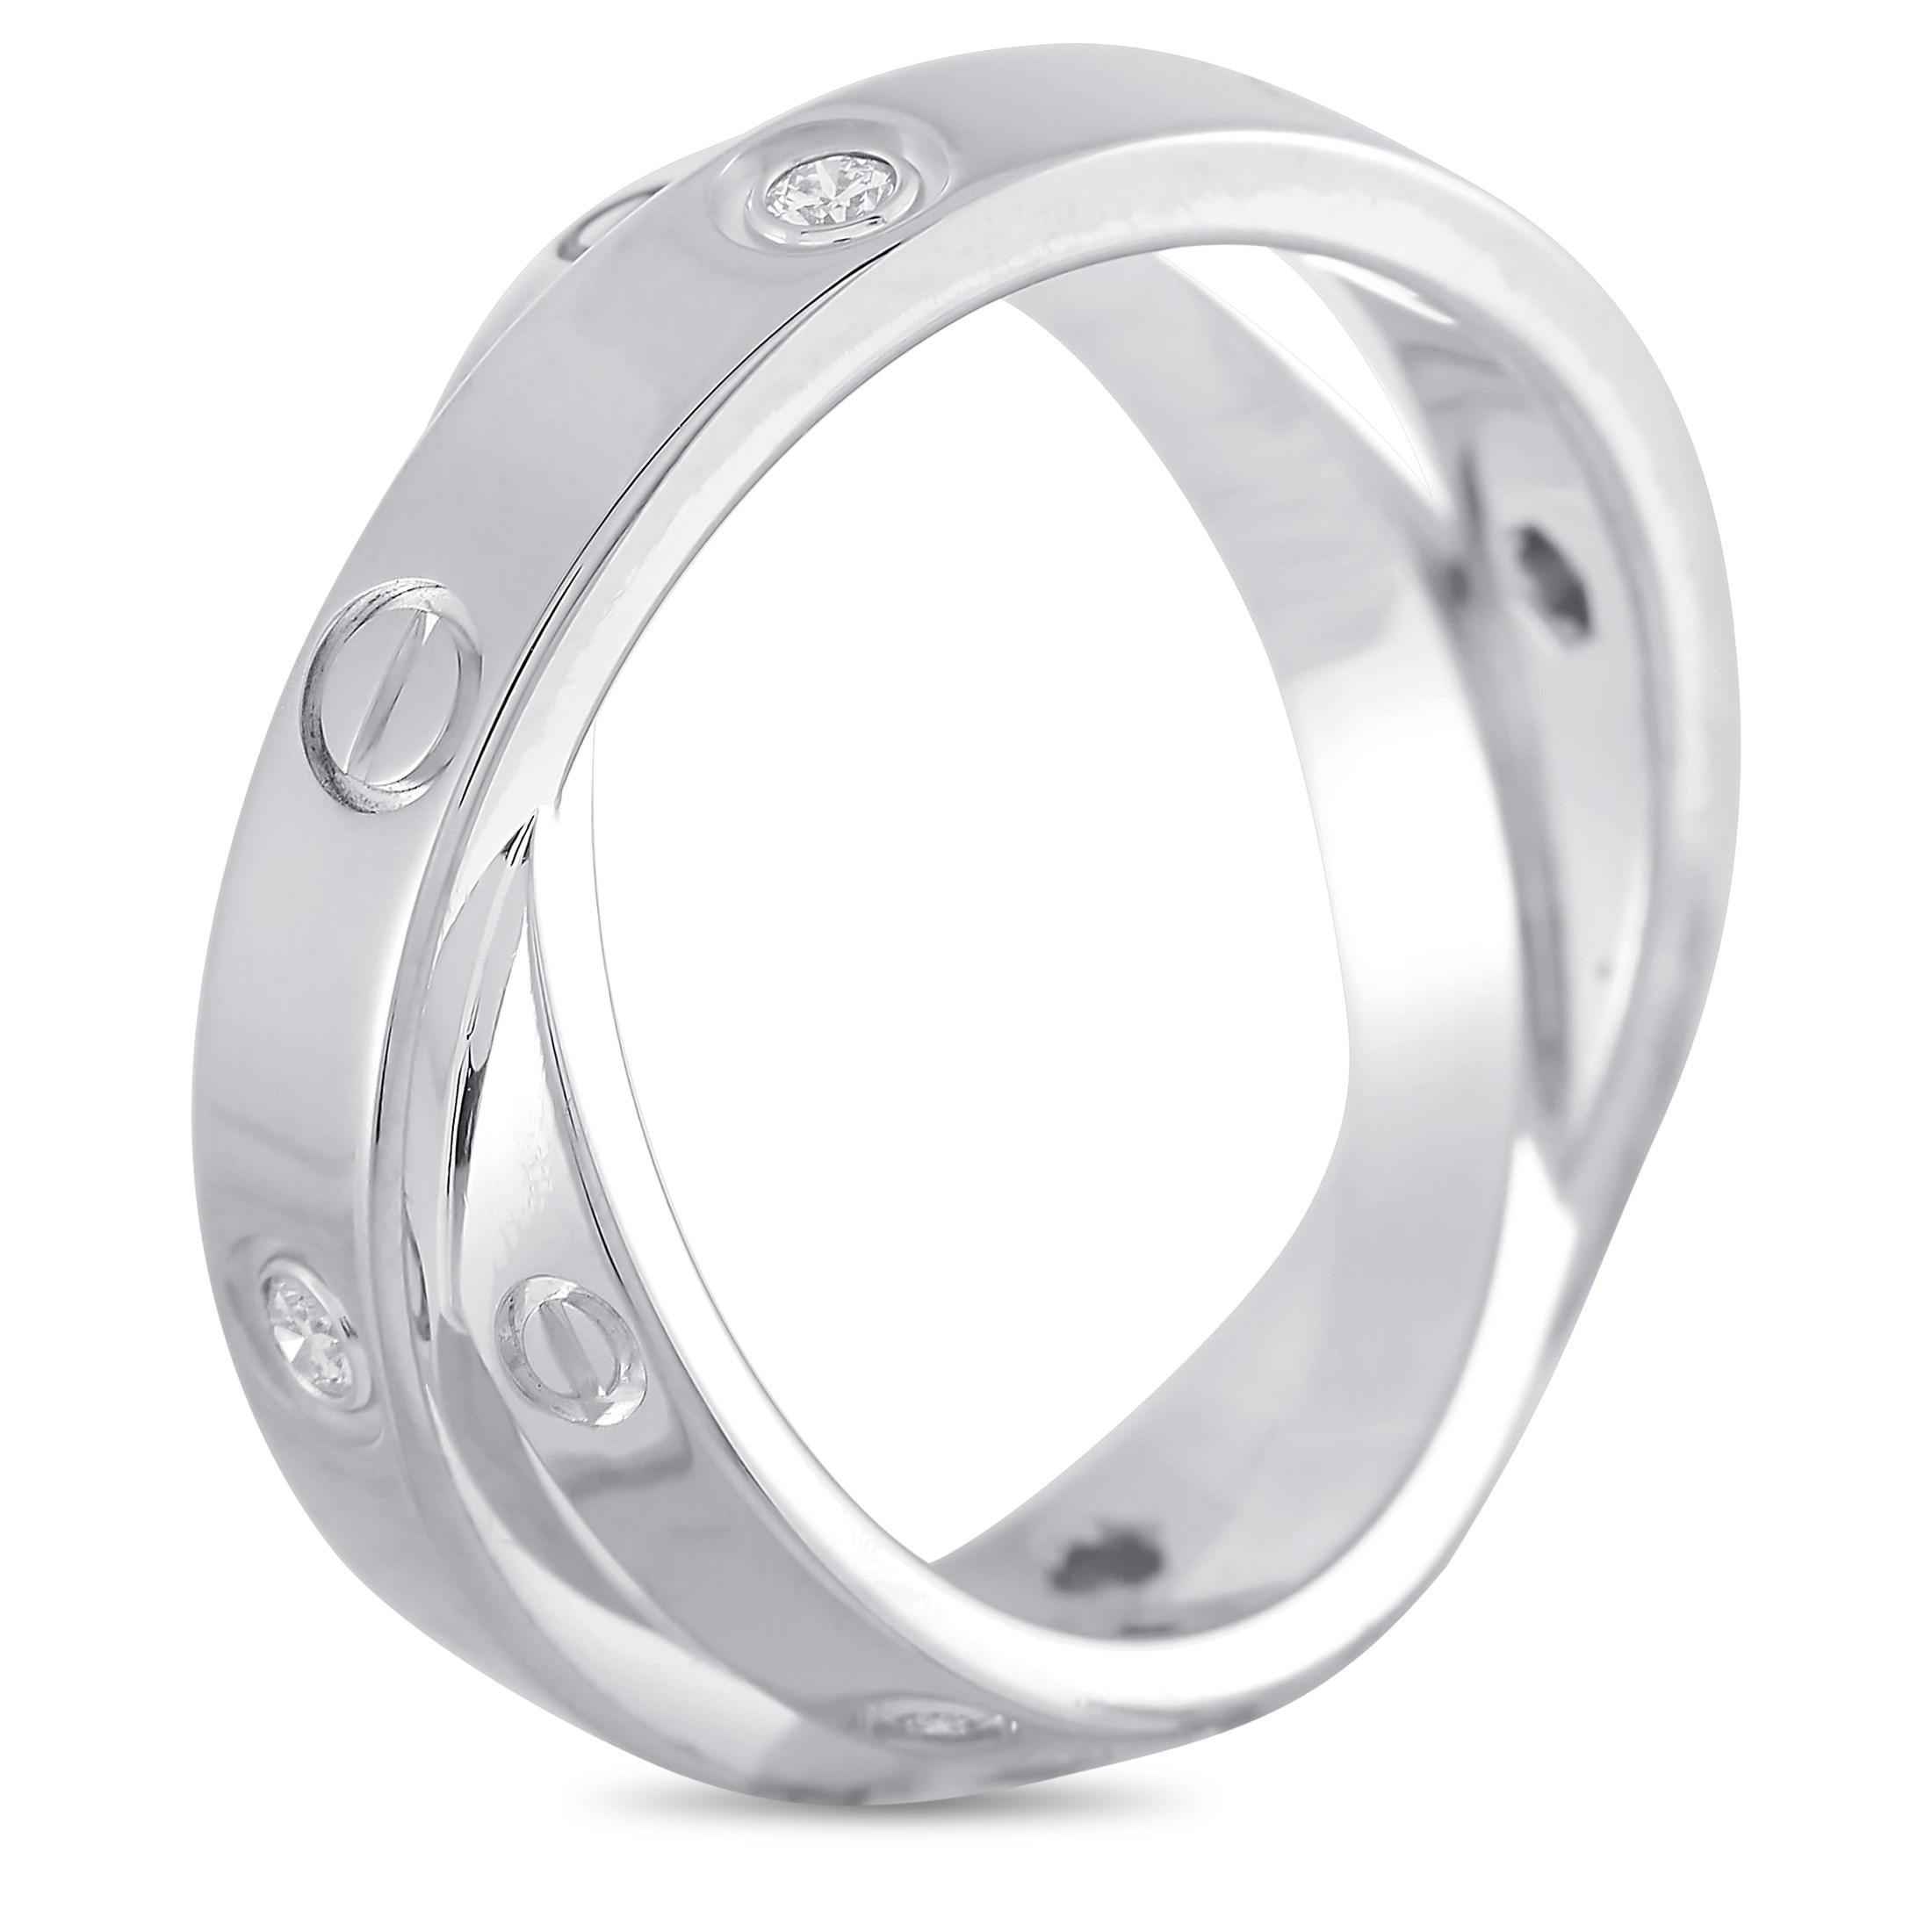 Celebrate a love that has survived twists and turns with this Cartier Astro Love Ring. Forged in 18K white gold, this double ring that twists and turns features a diamond-and-screw motif around its outer edge. The simple yet elegant style is perfect